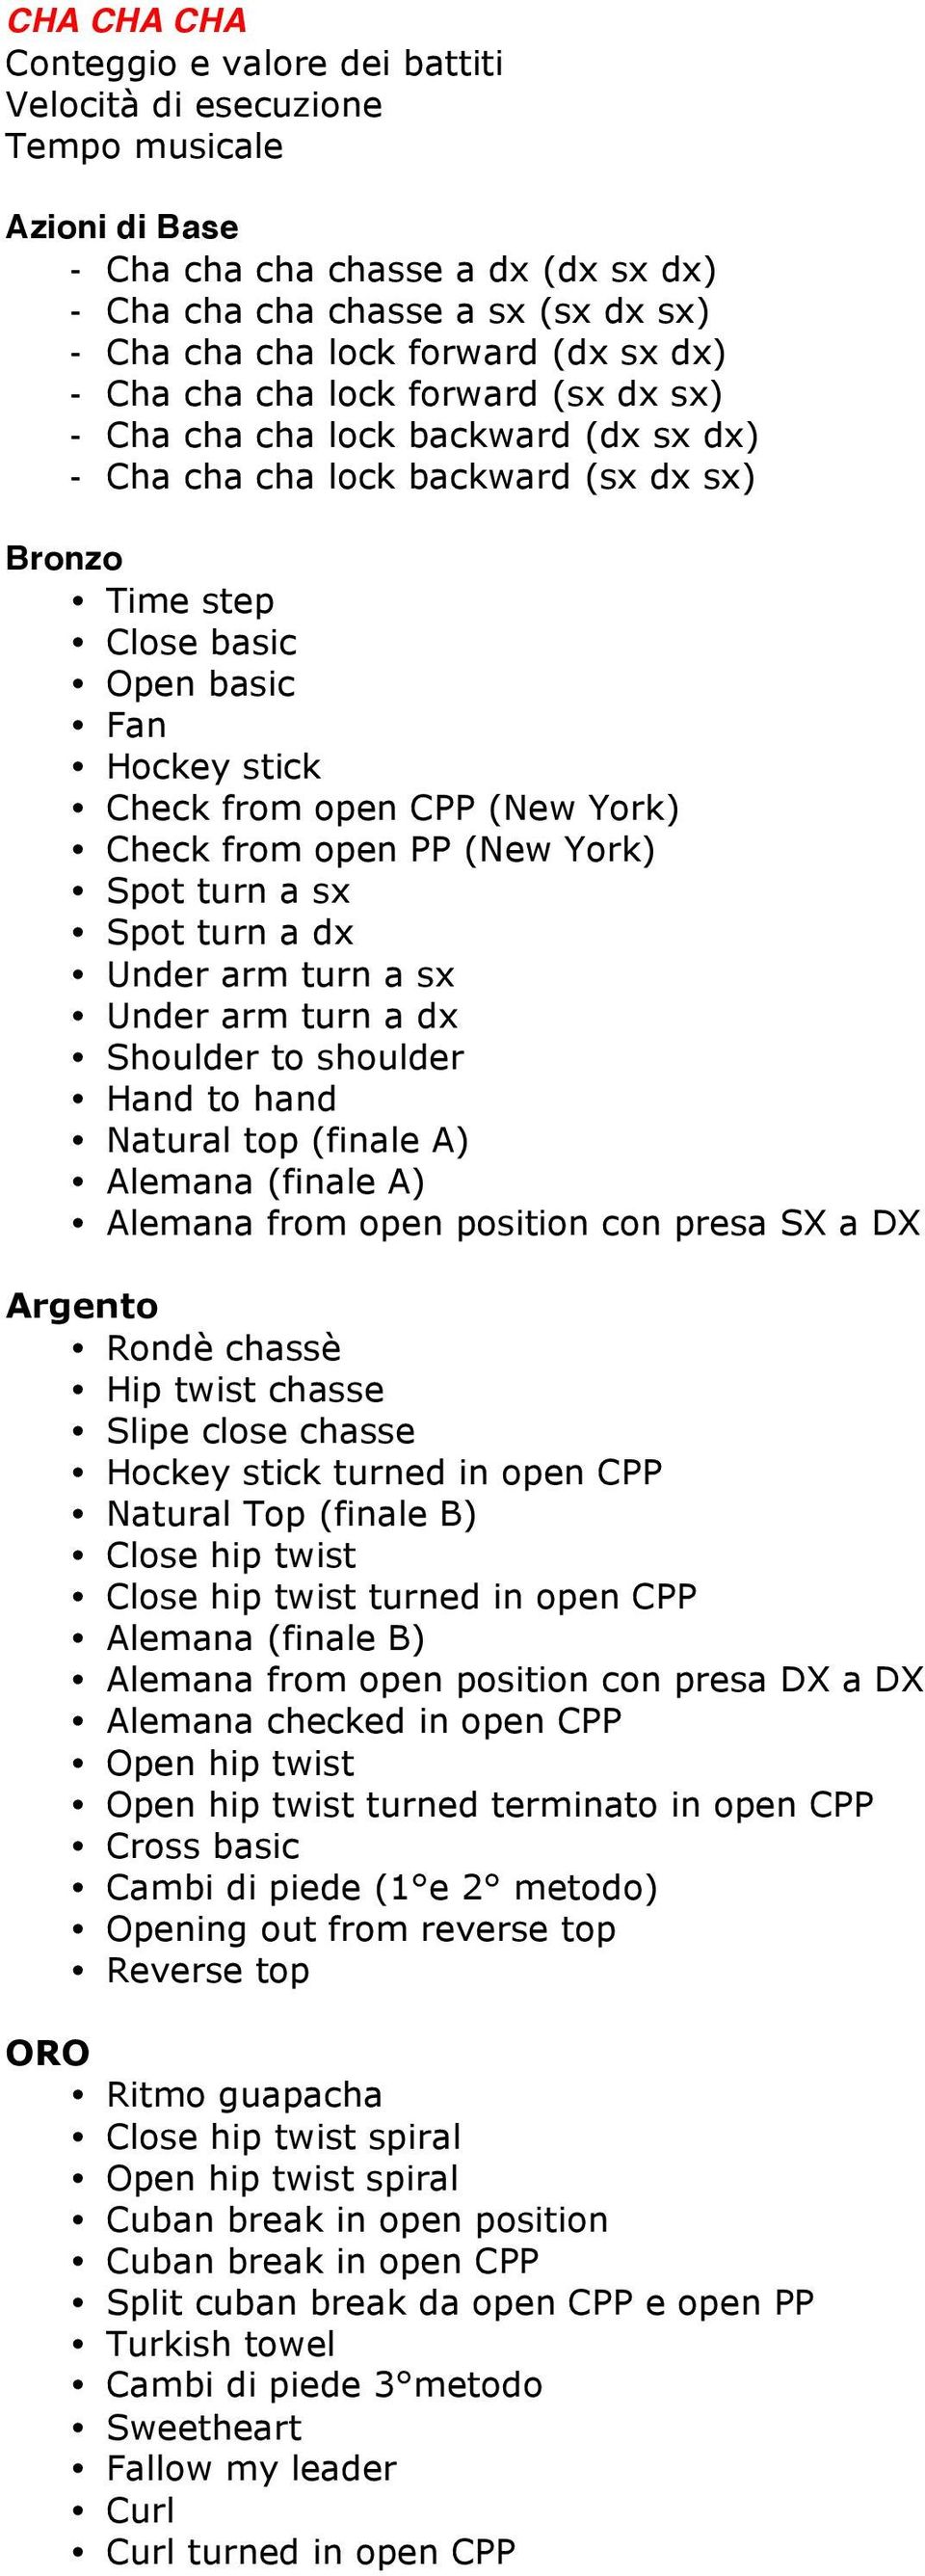 Under arm turn a sx Under arm turn a dx Shoulder to shoulder Hand to hand Natural top (finale A) Alemana (finale A) Alemana from open position con presa SX a DX Argento Rondè chassè Hip twist chasse